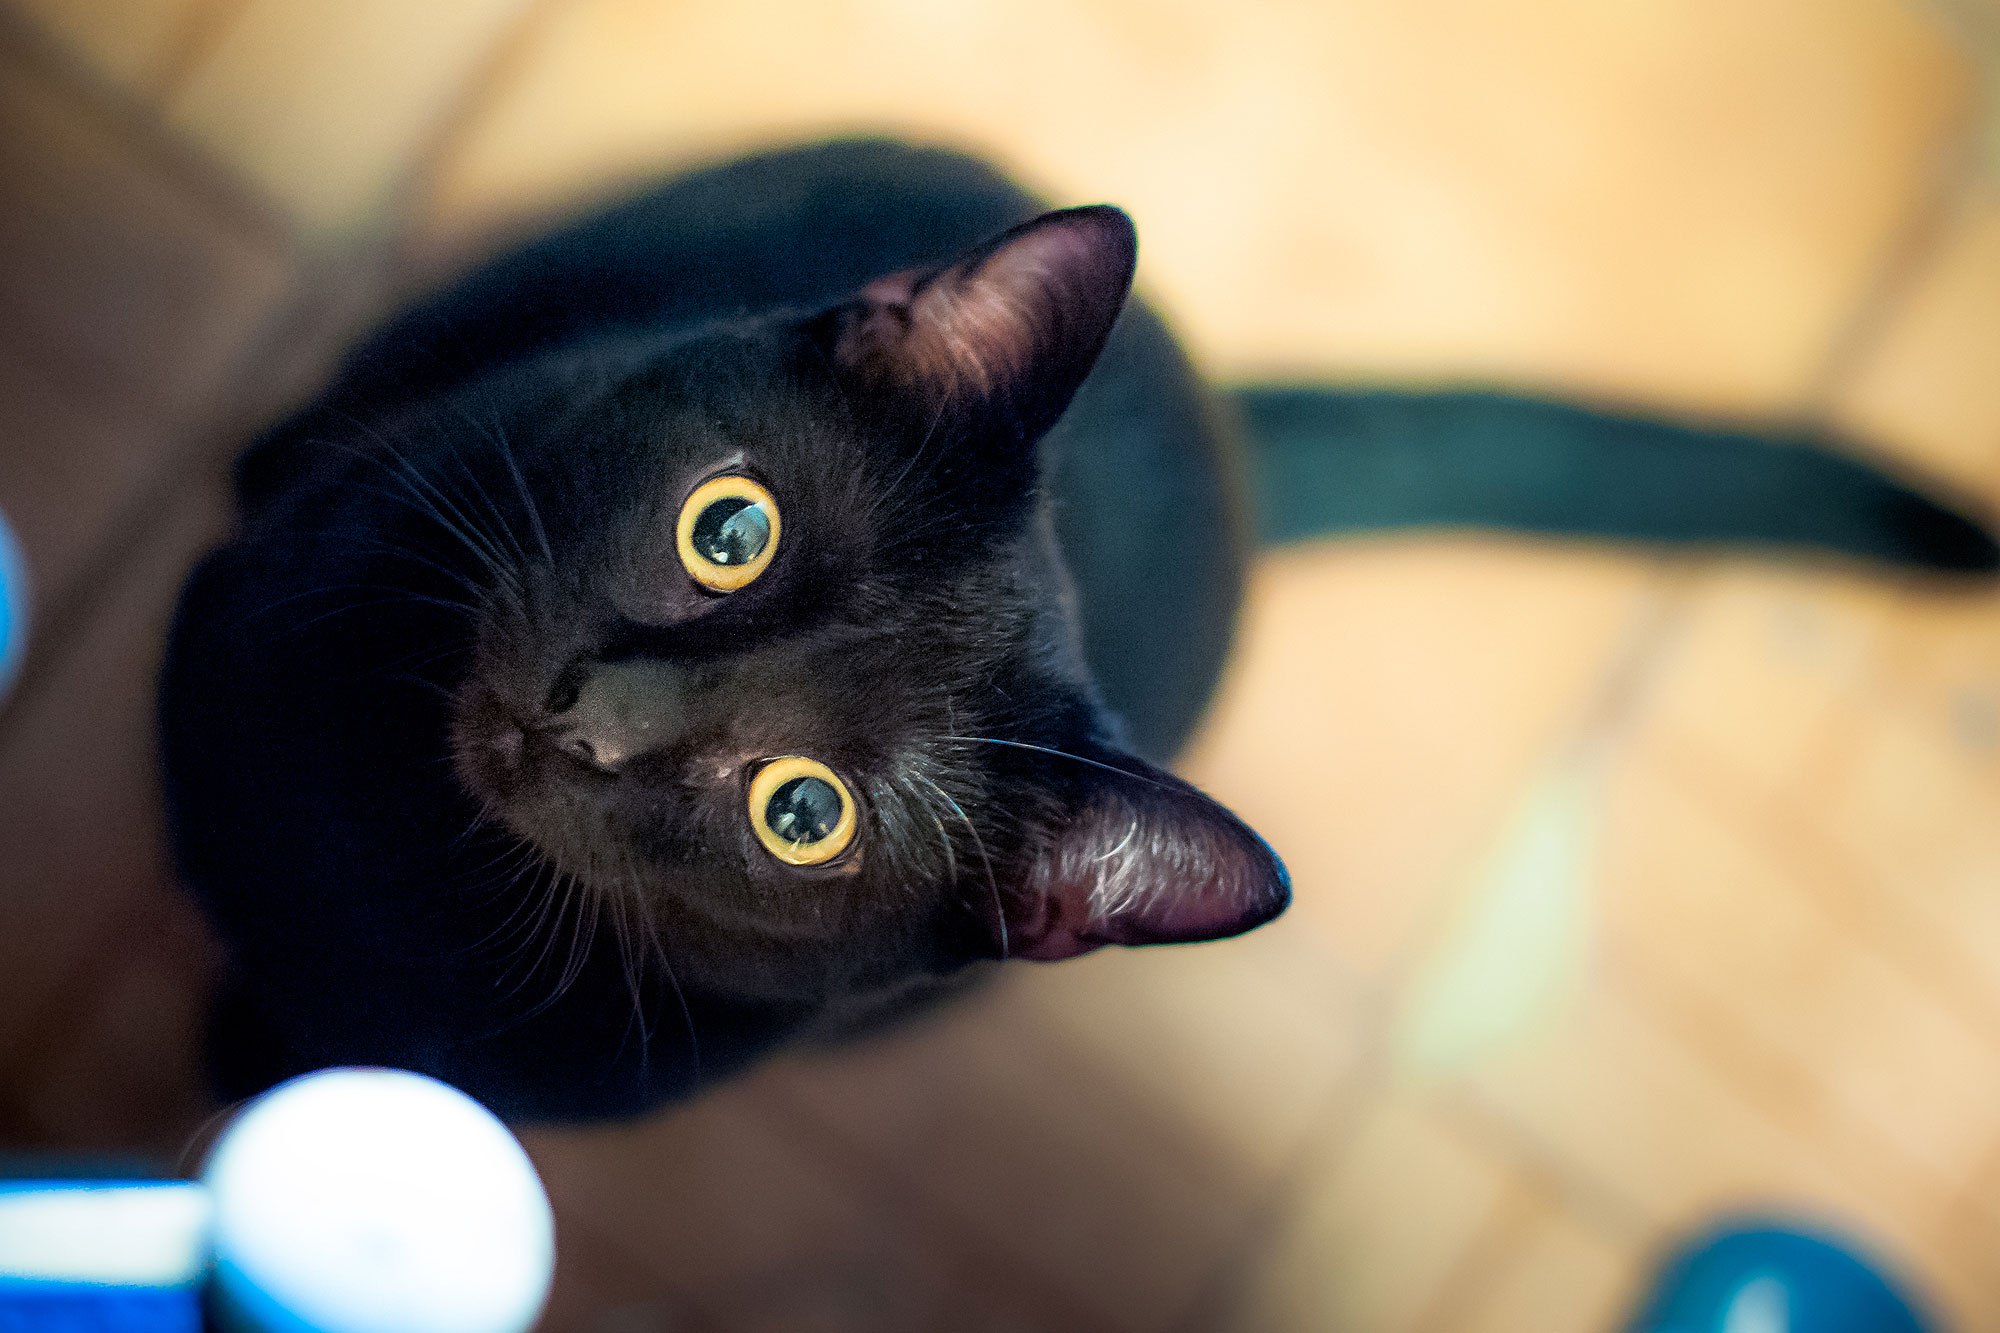 Why Are Black Cats Considered Unlucky? | PEOPLE.com